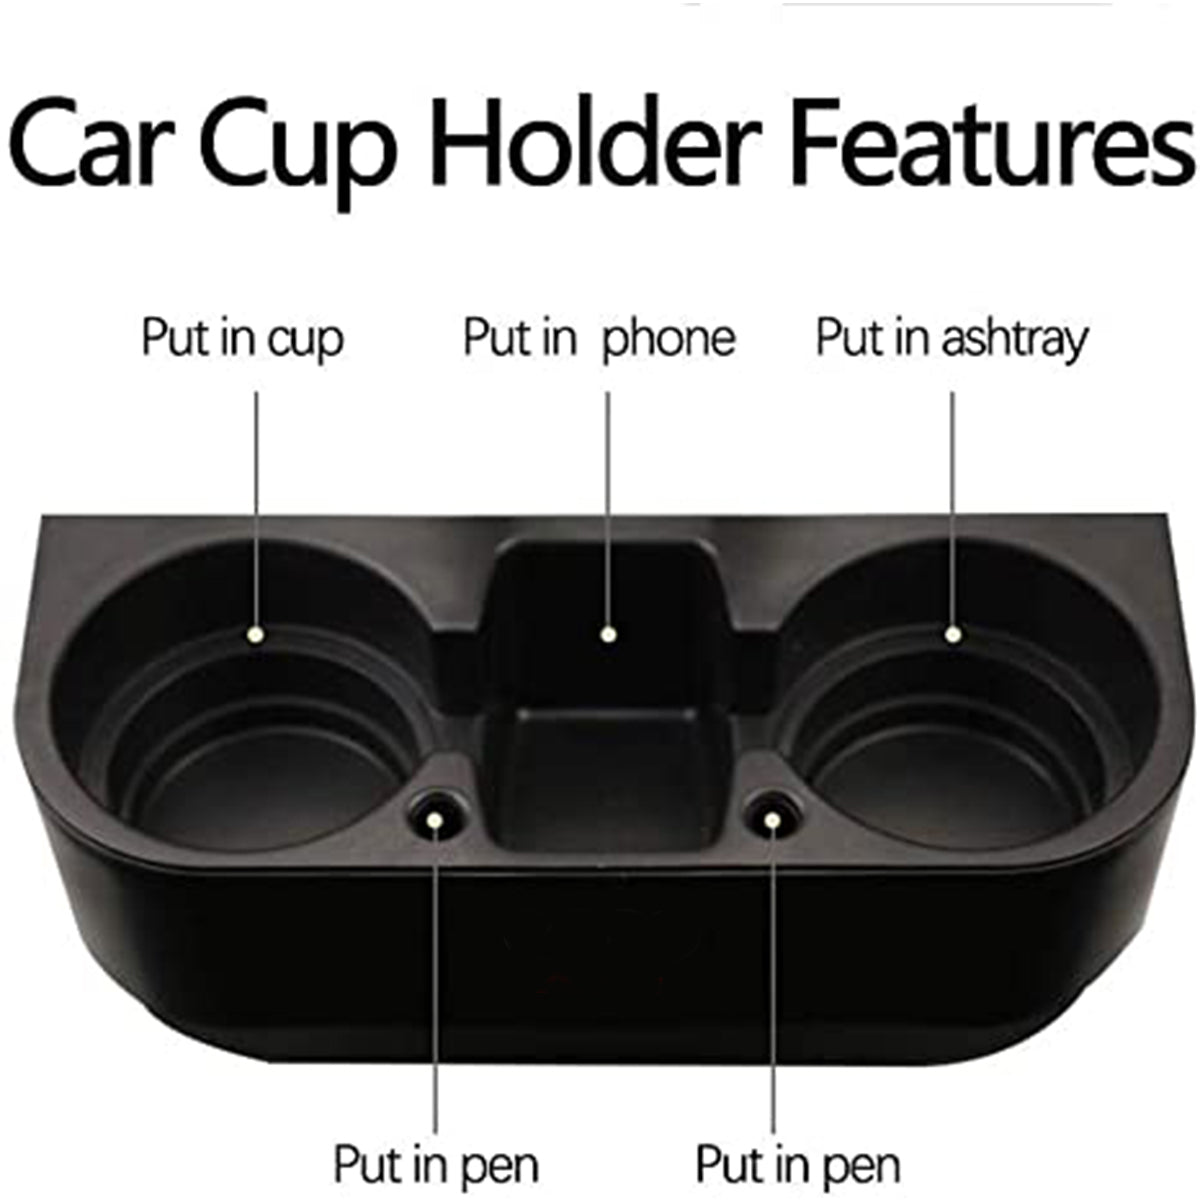 Cup Holder Portable Multifunction Vehicle Seat Cup Cell Phone Drinks Holder Box Car Interior Organizer, Custom For Your Cars, Car Accessories MY11995 - Delicate Leather